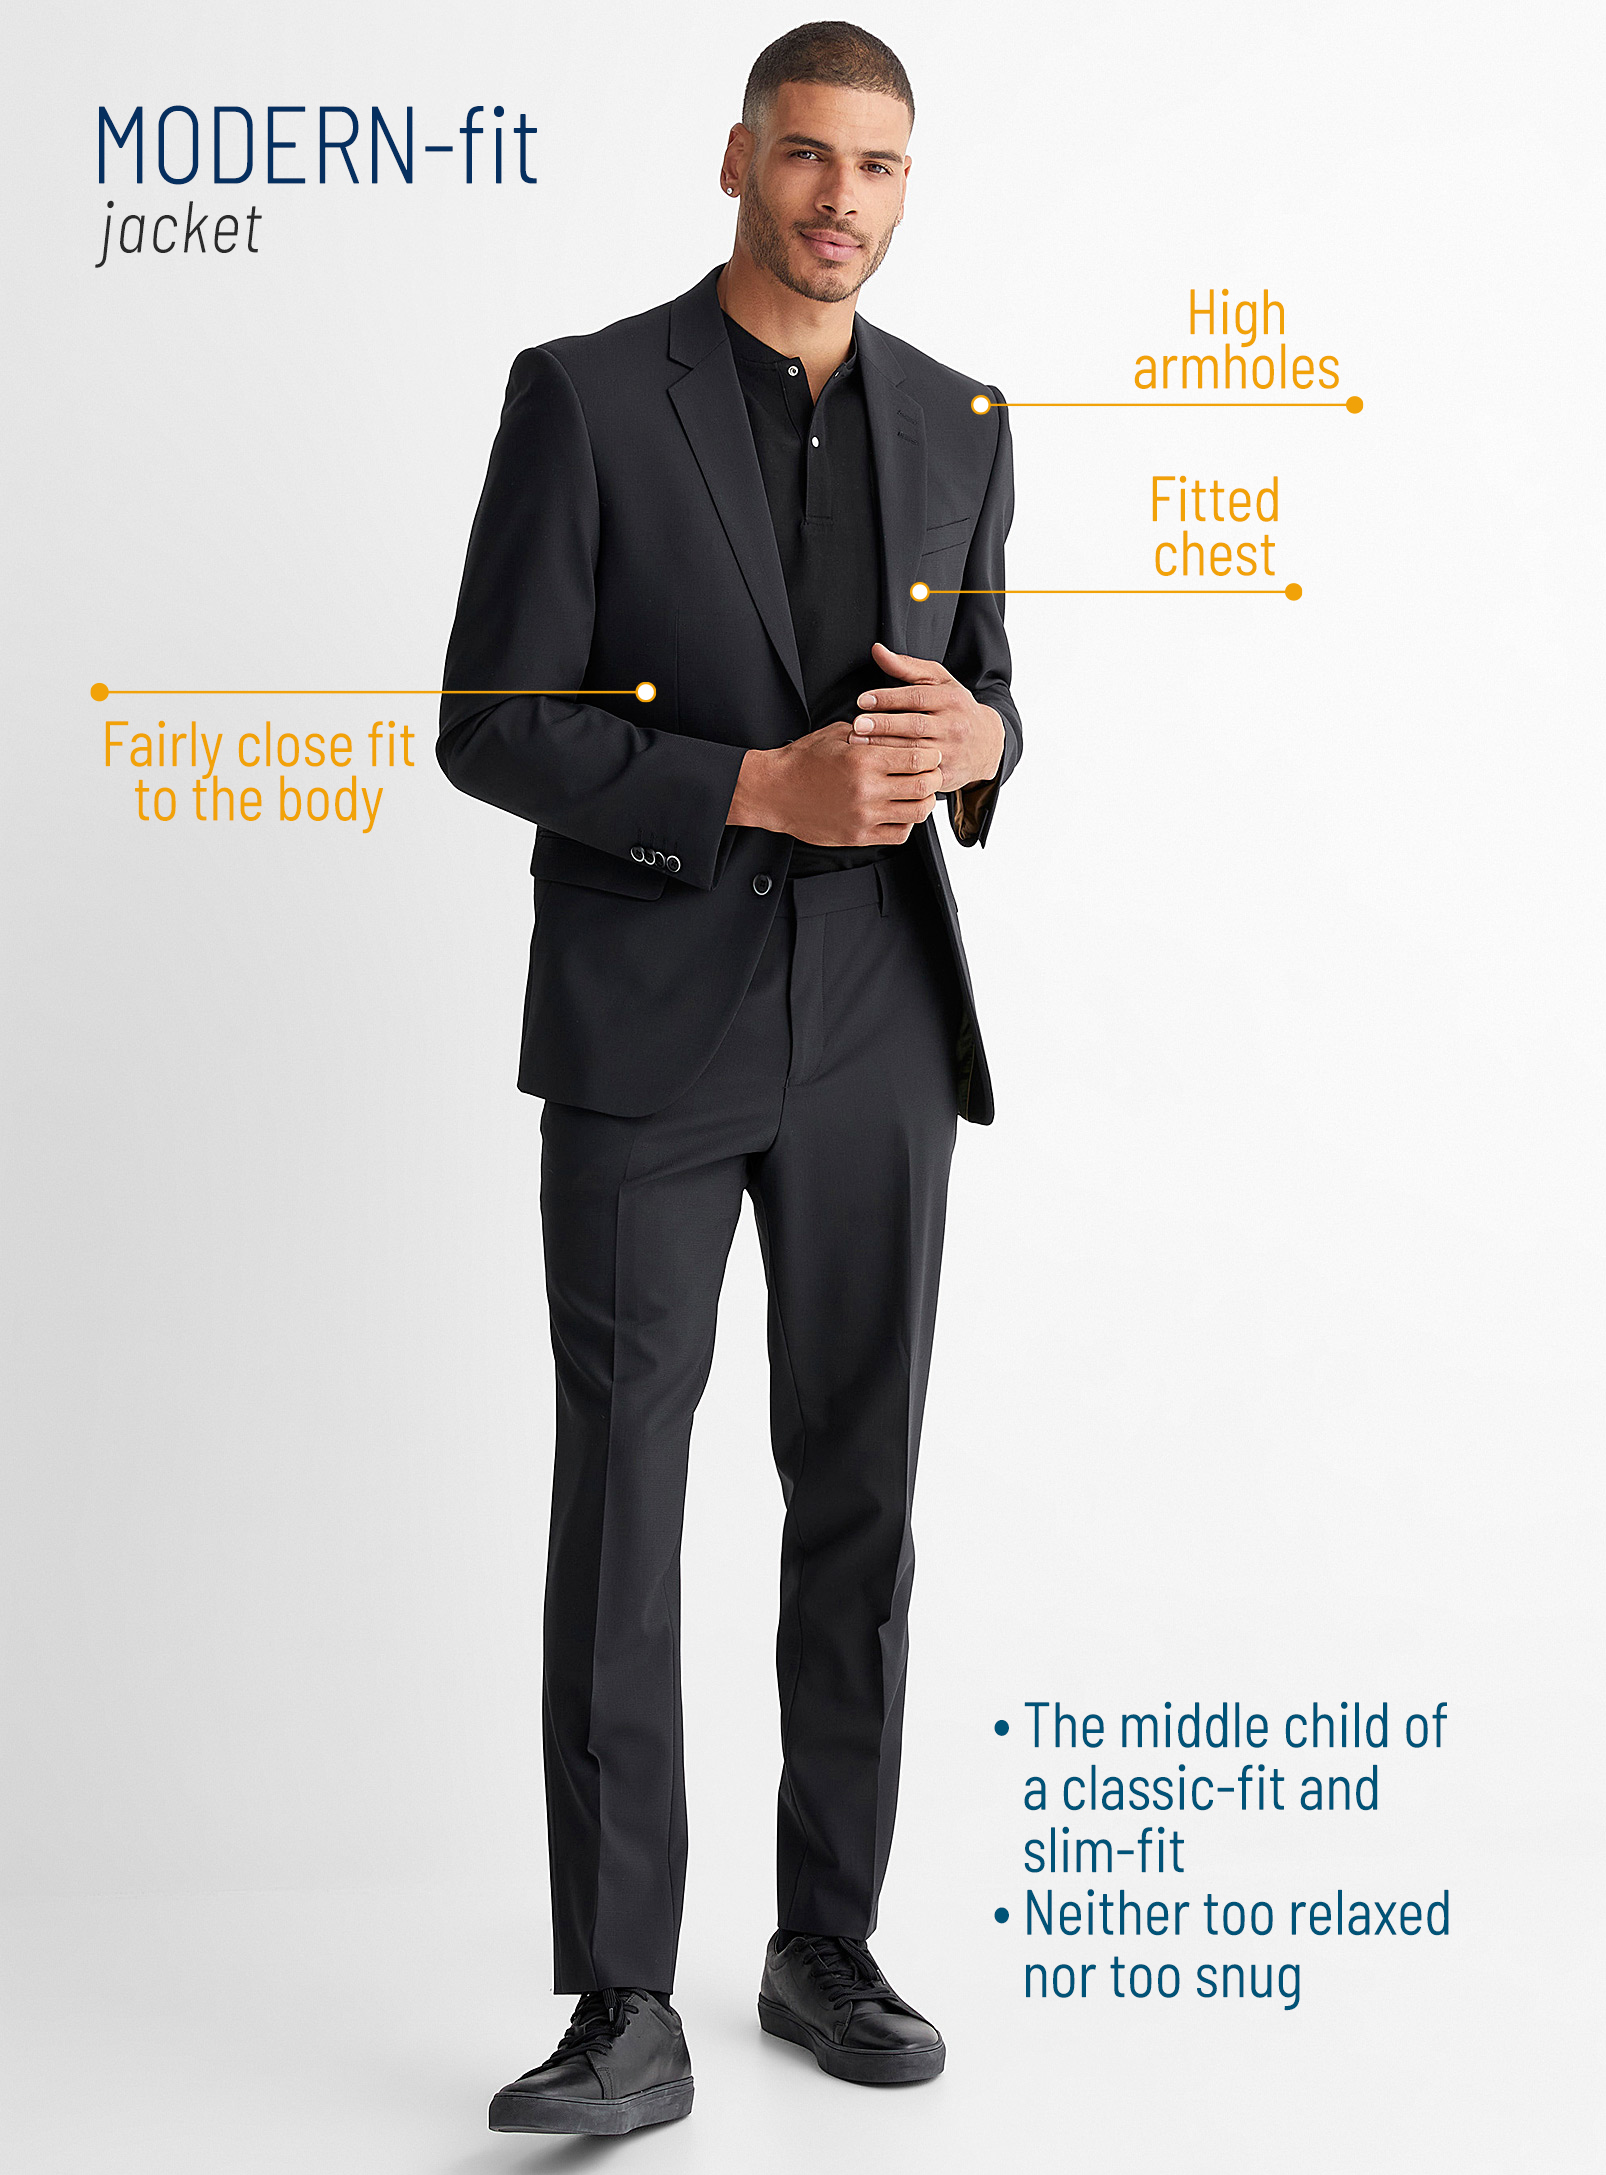 Modern-fit jacket features